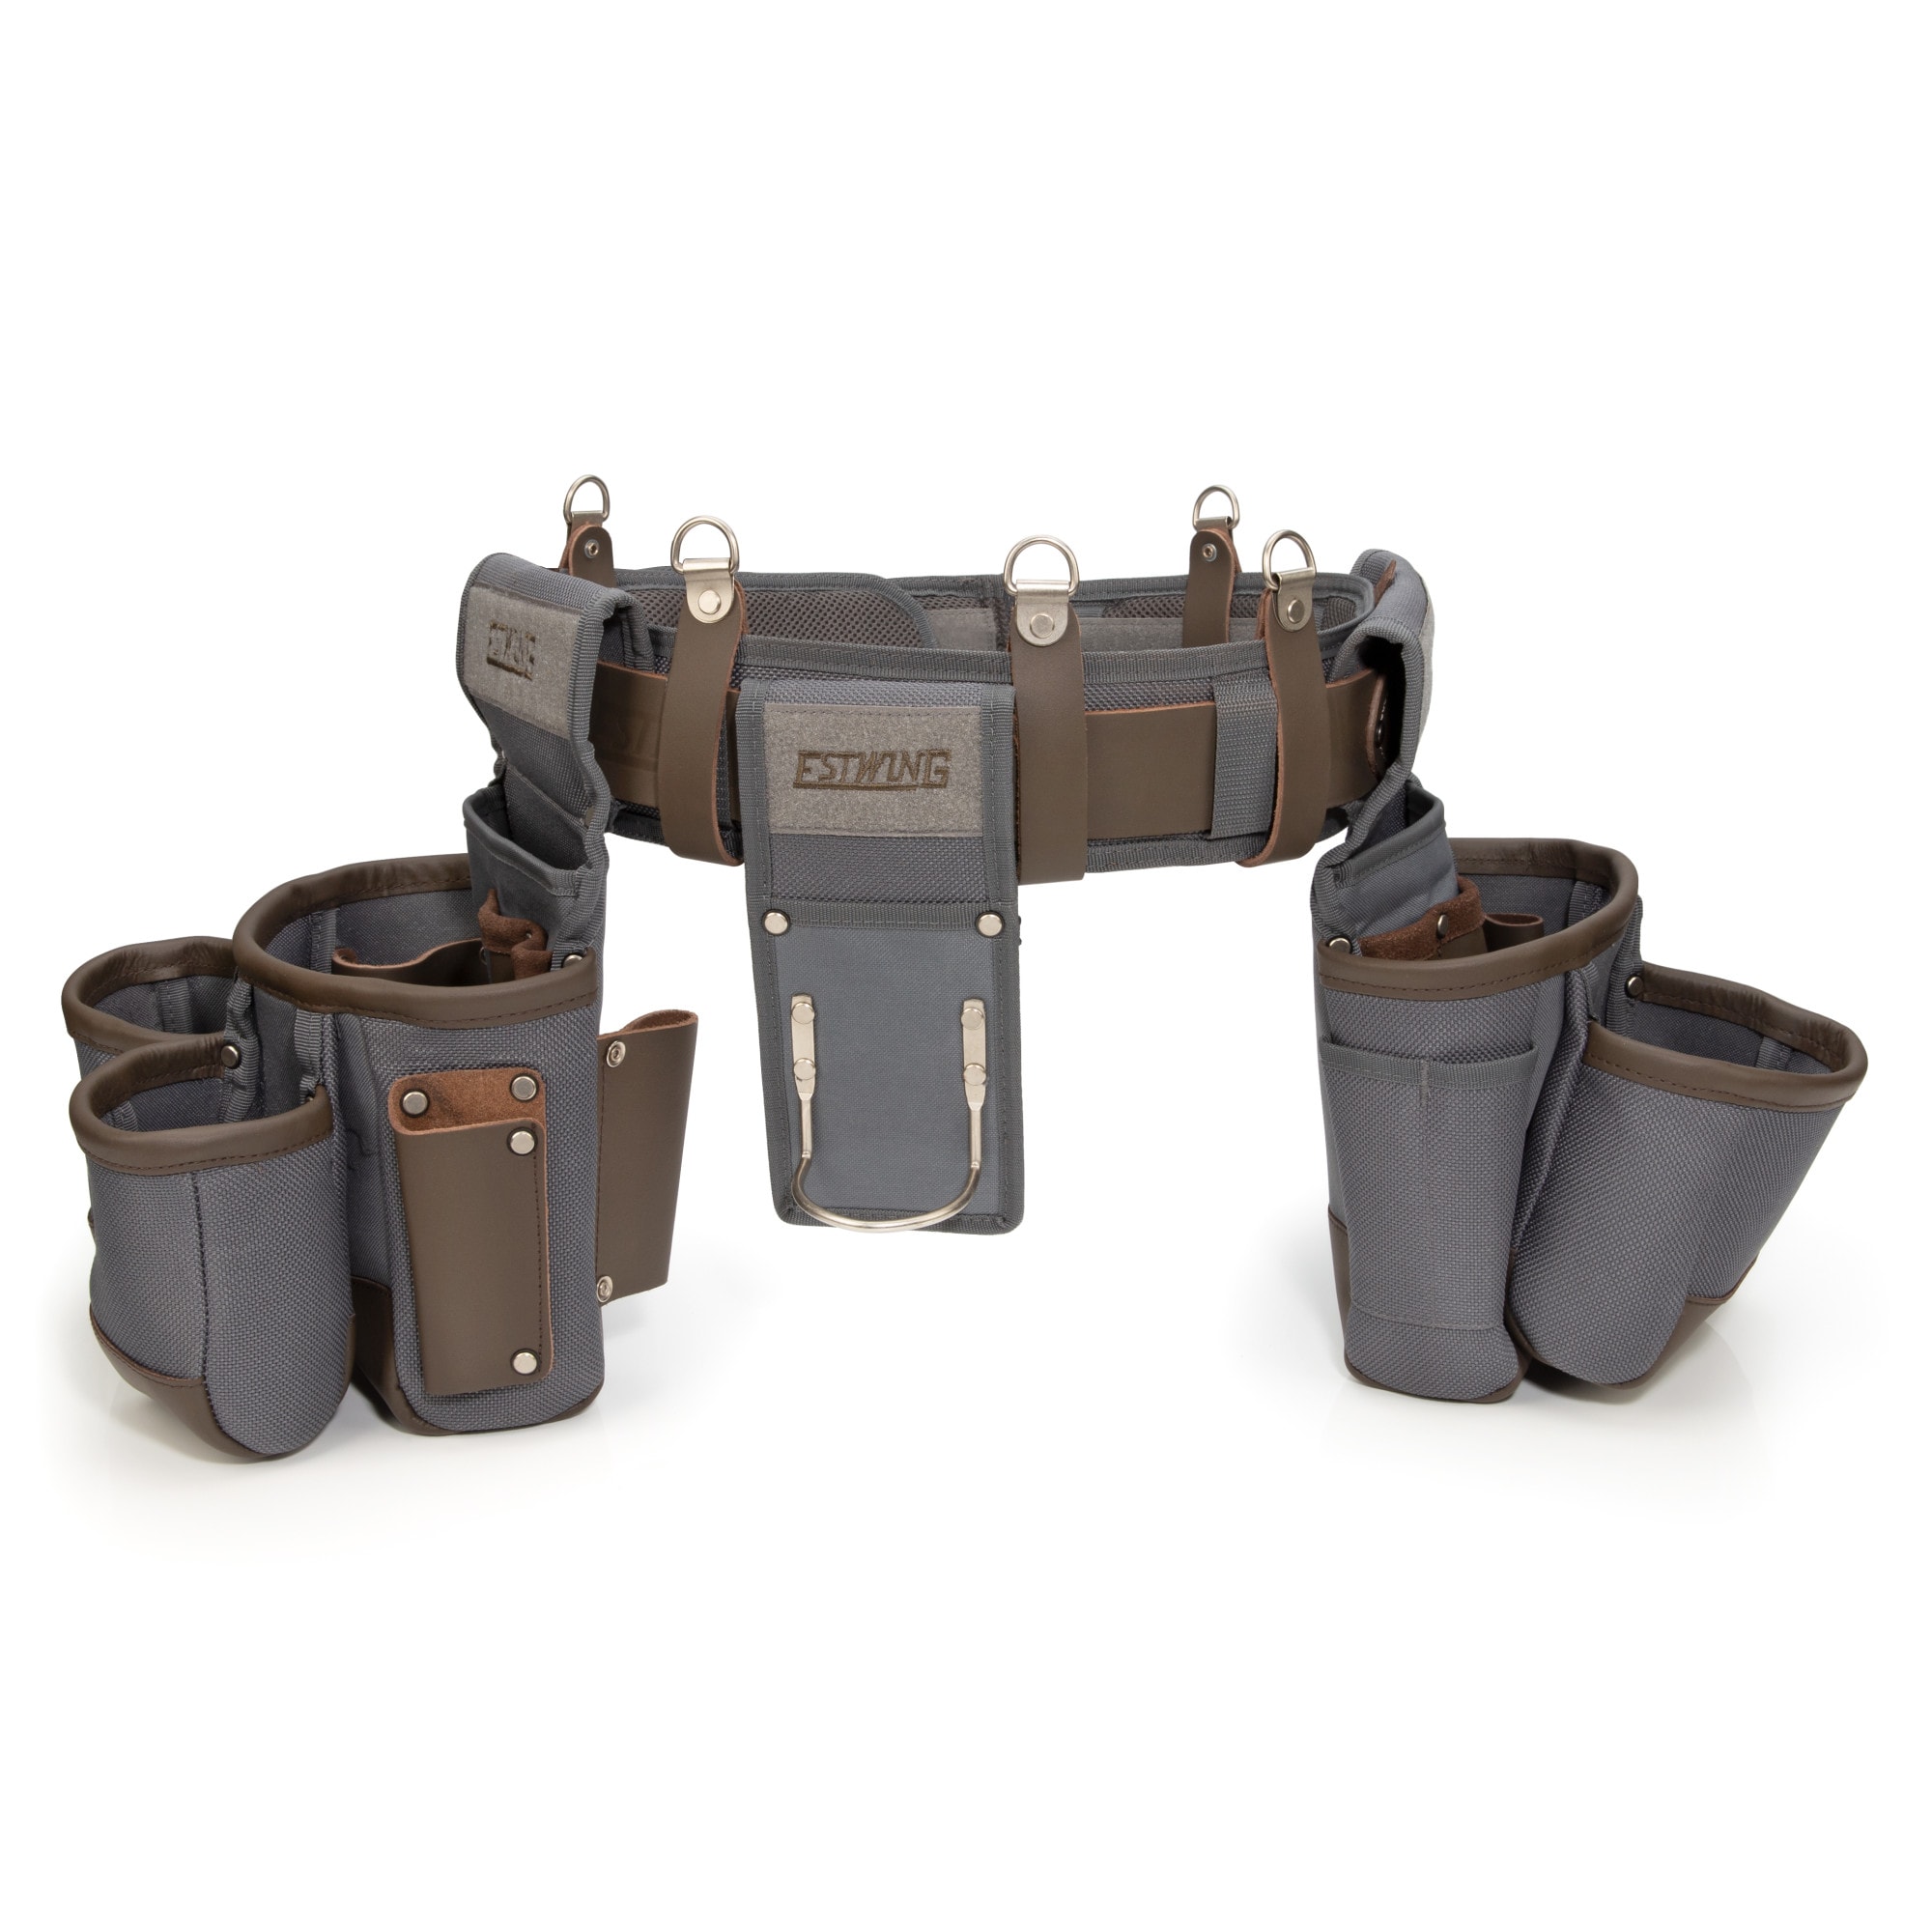 Estwing Framer Polyester Suspension Tool Rig in the Tool Belts